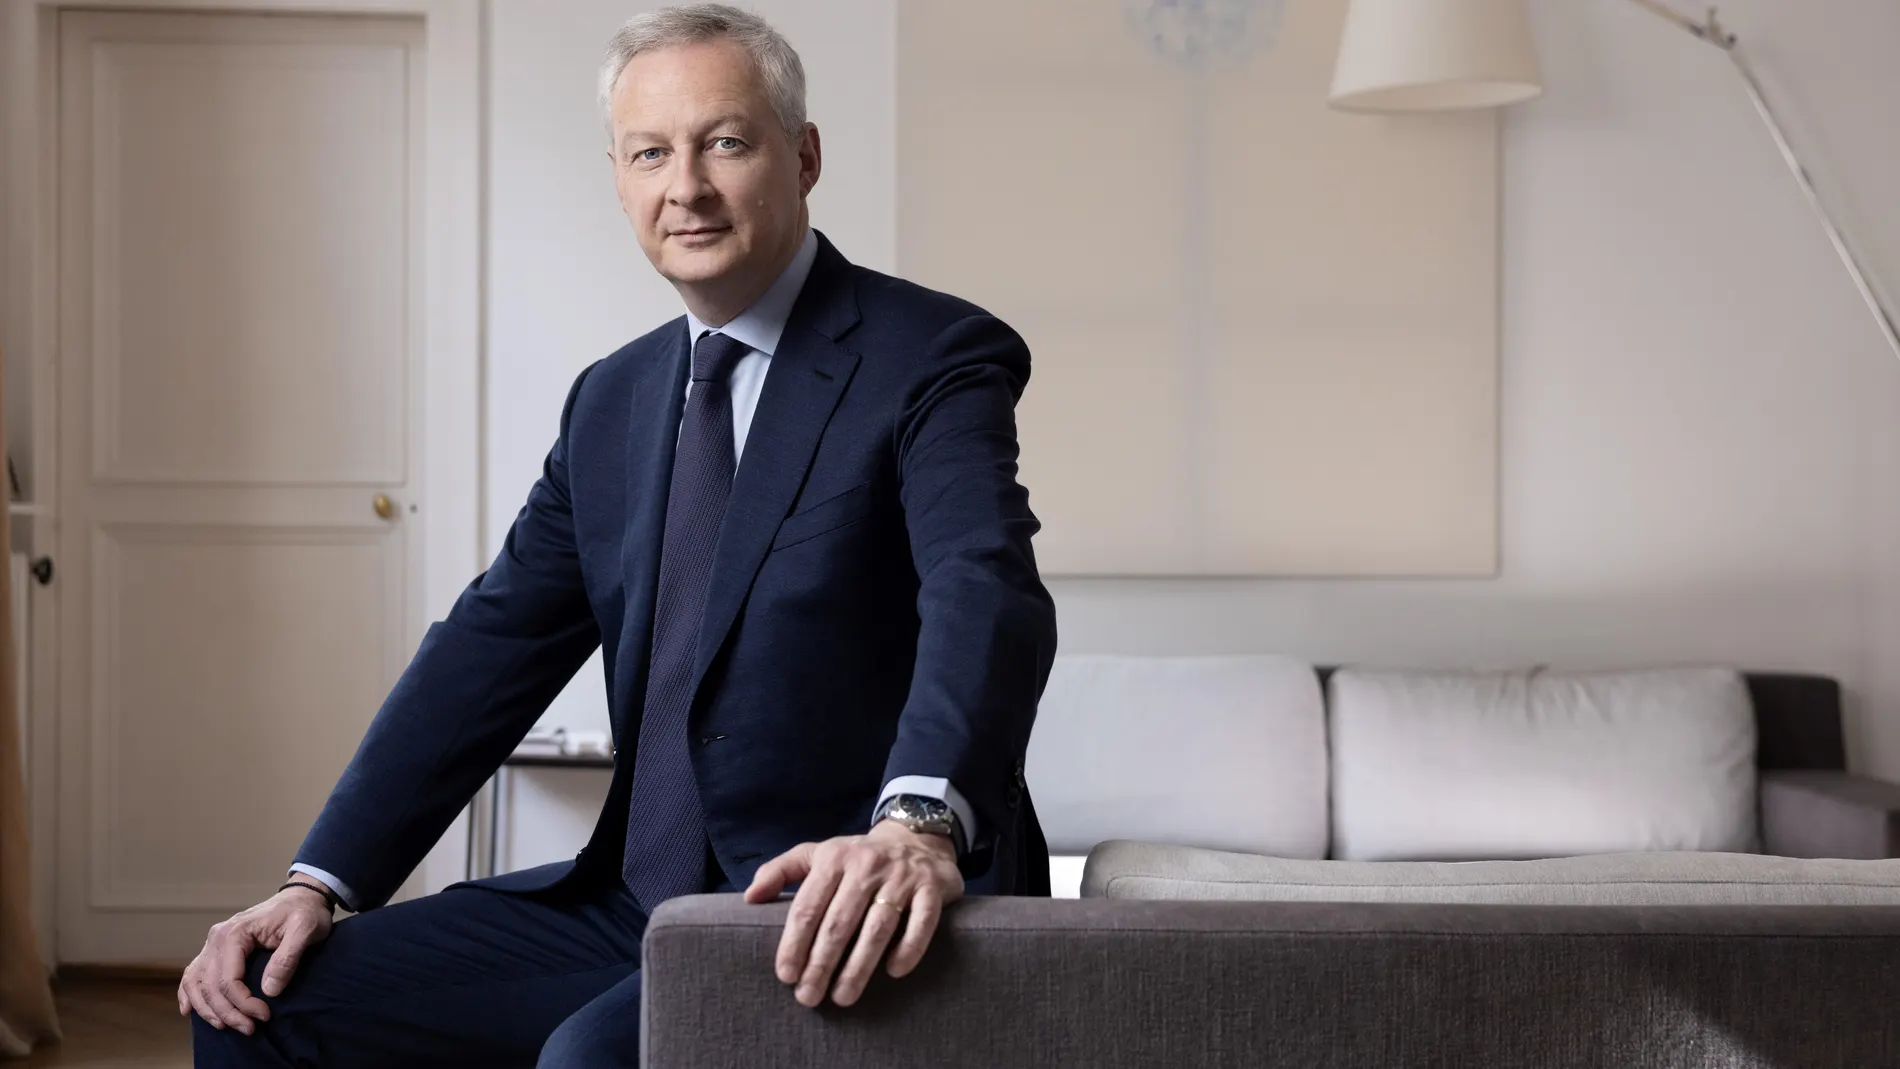 French Minister for the Economy and Finances Bruno Le Maire poses during a photo session at his home in Paris on April 27, 2023. 